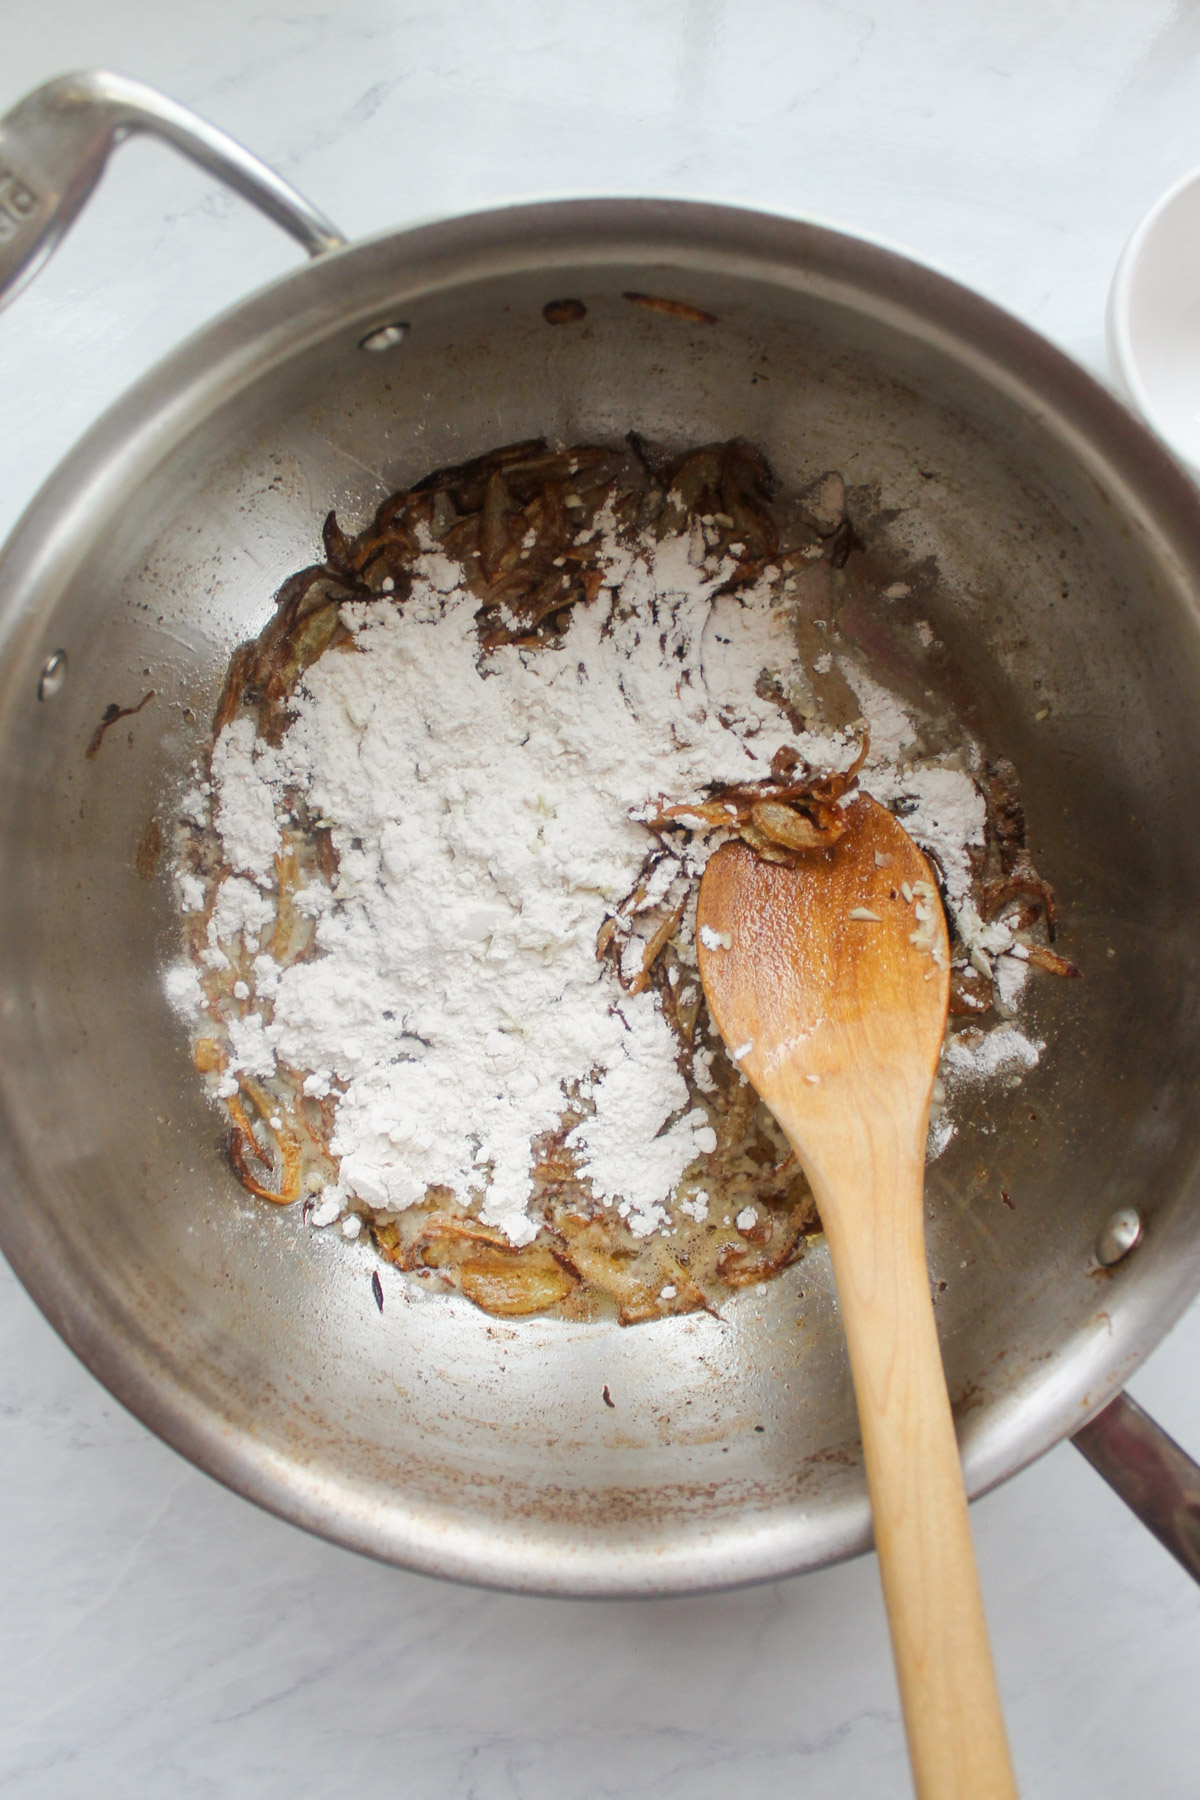 Adding flour and garlic to the buttery caramelized onions to form a roux.